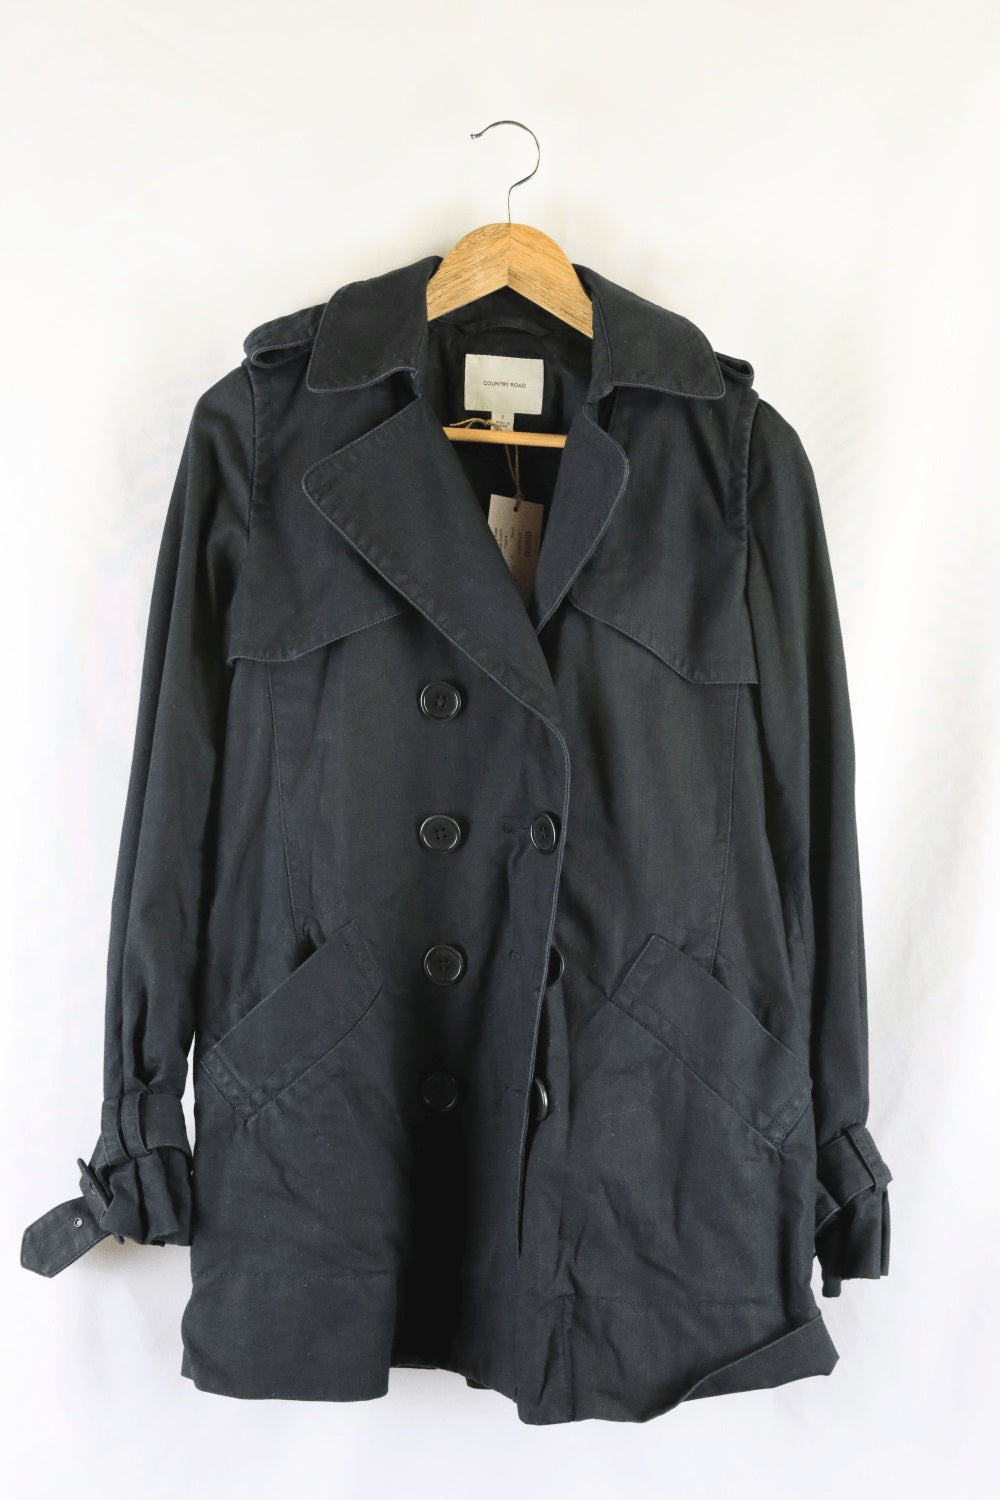 Country Road Black Trench Coat S